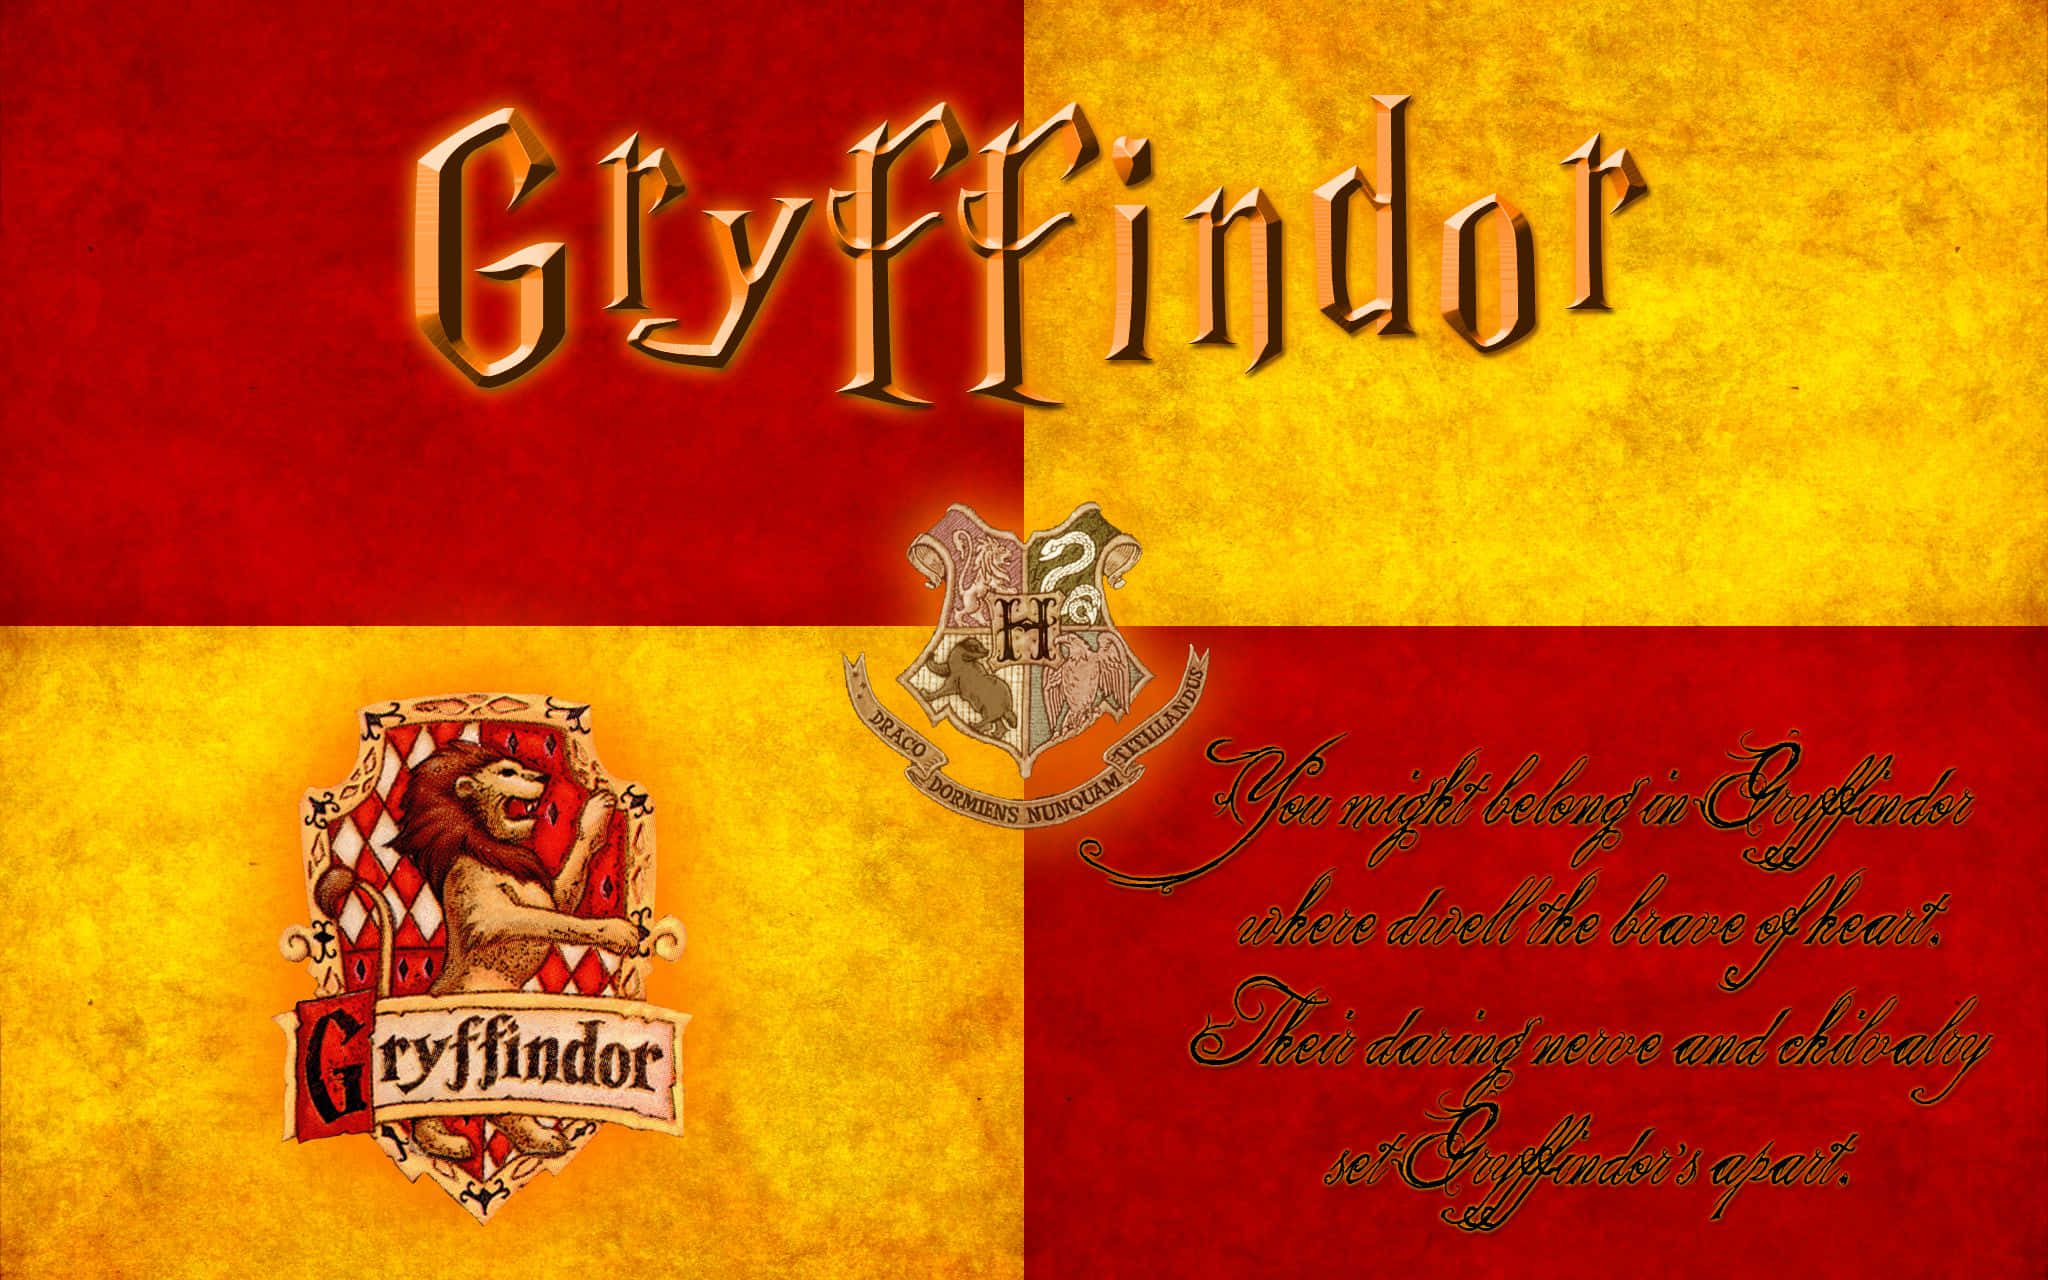 The brave and courageous Griffindor house!